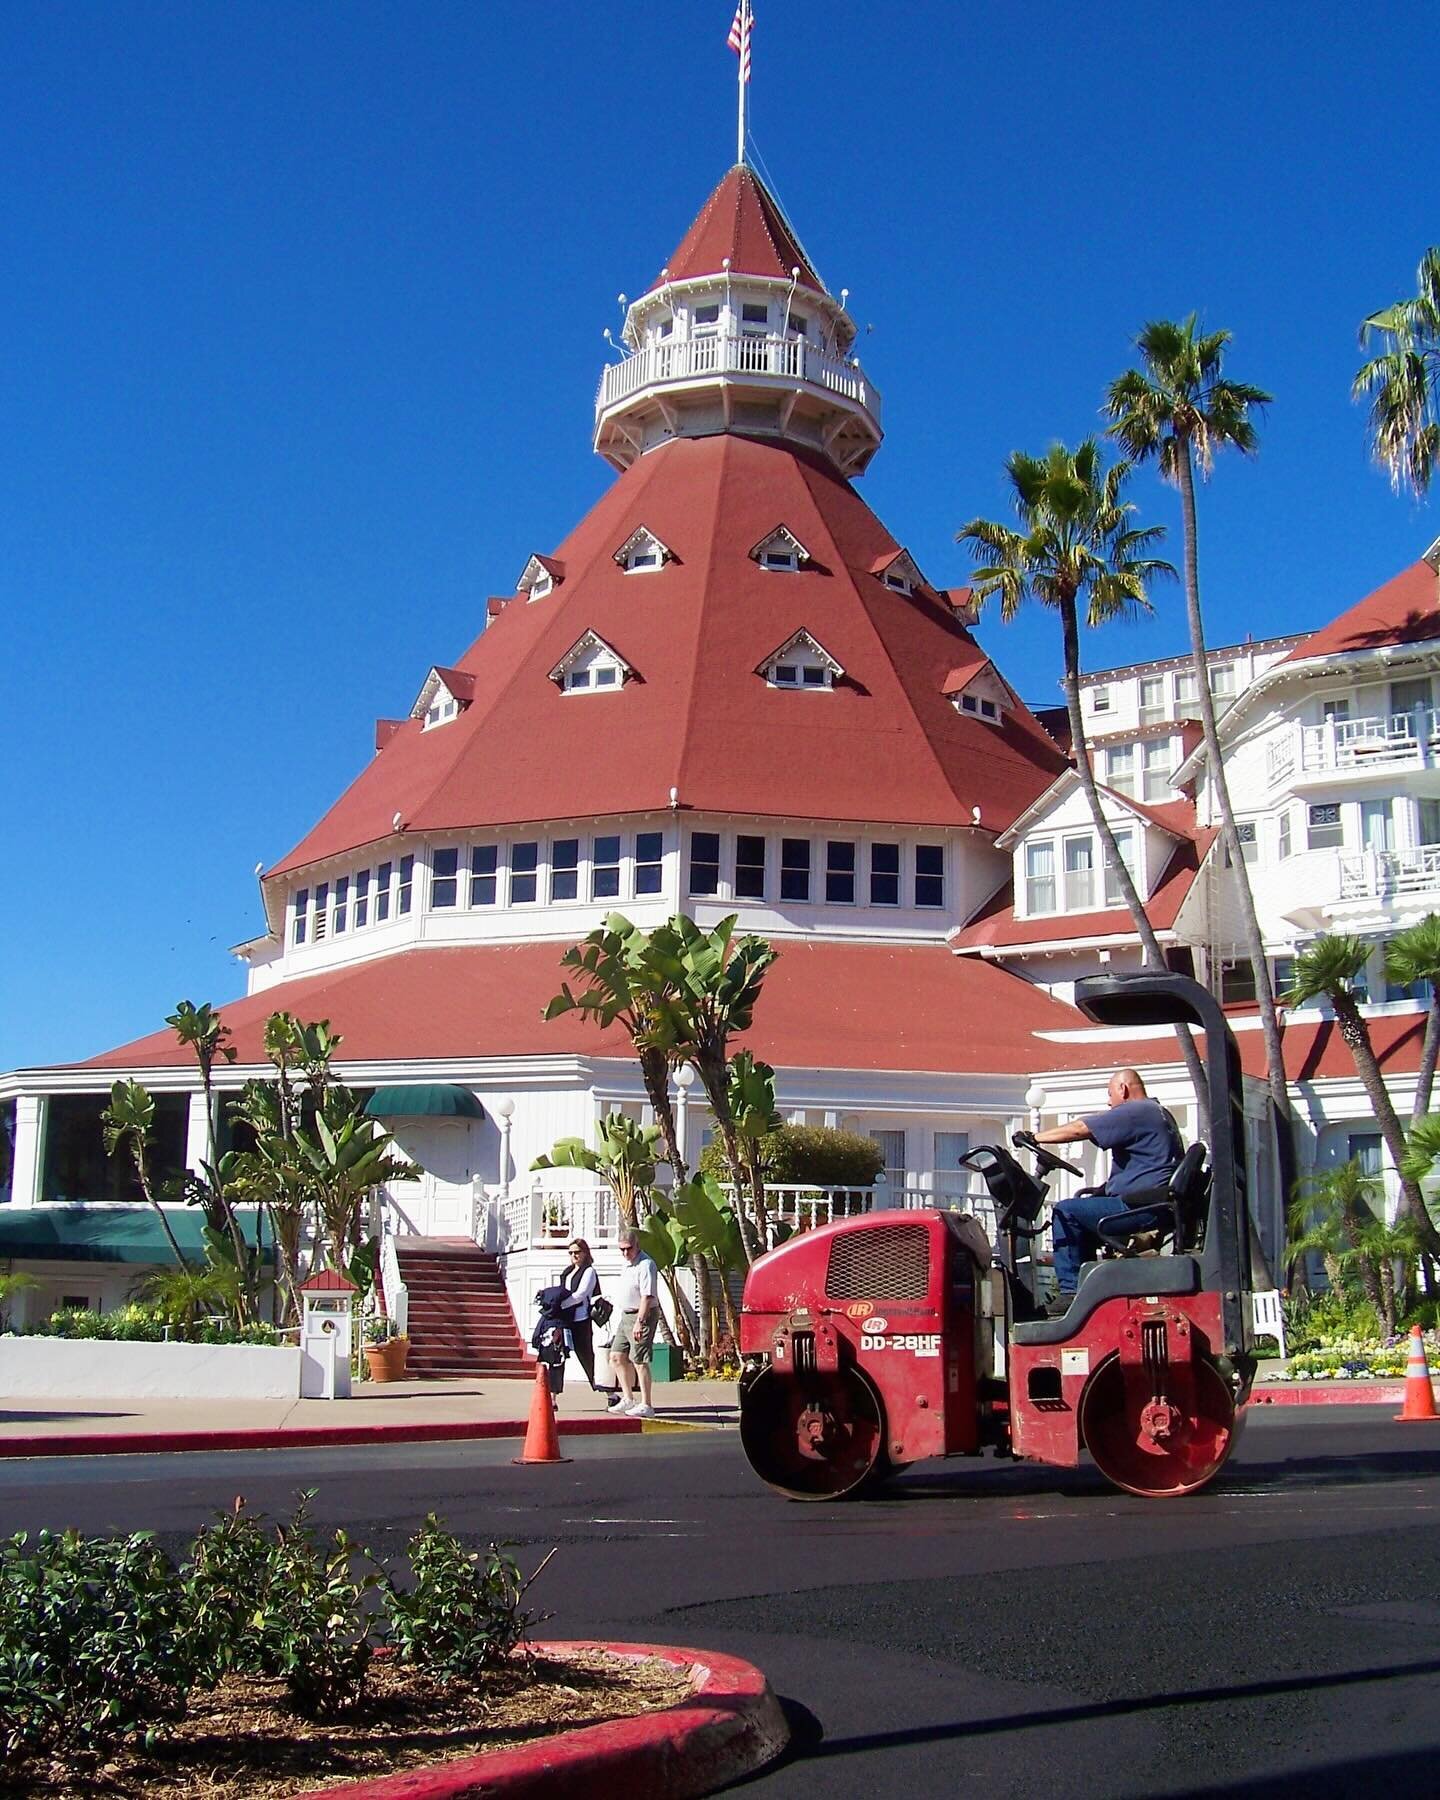 This project was done probably 15 years ago! We removed and replaced the asphalt at the Hotel Del Coronado. We are proud to have worked on such an impressive historical landmark.⁣
.⁣
⁣
.⁣
⁣
.⁣
⁣
#35yearsofaac #35thanniversary #americanasphalt #aac #a